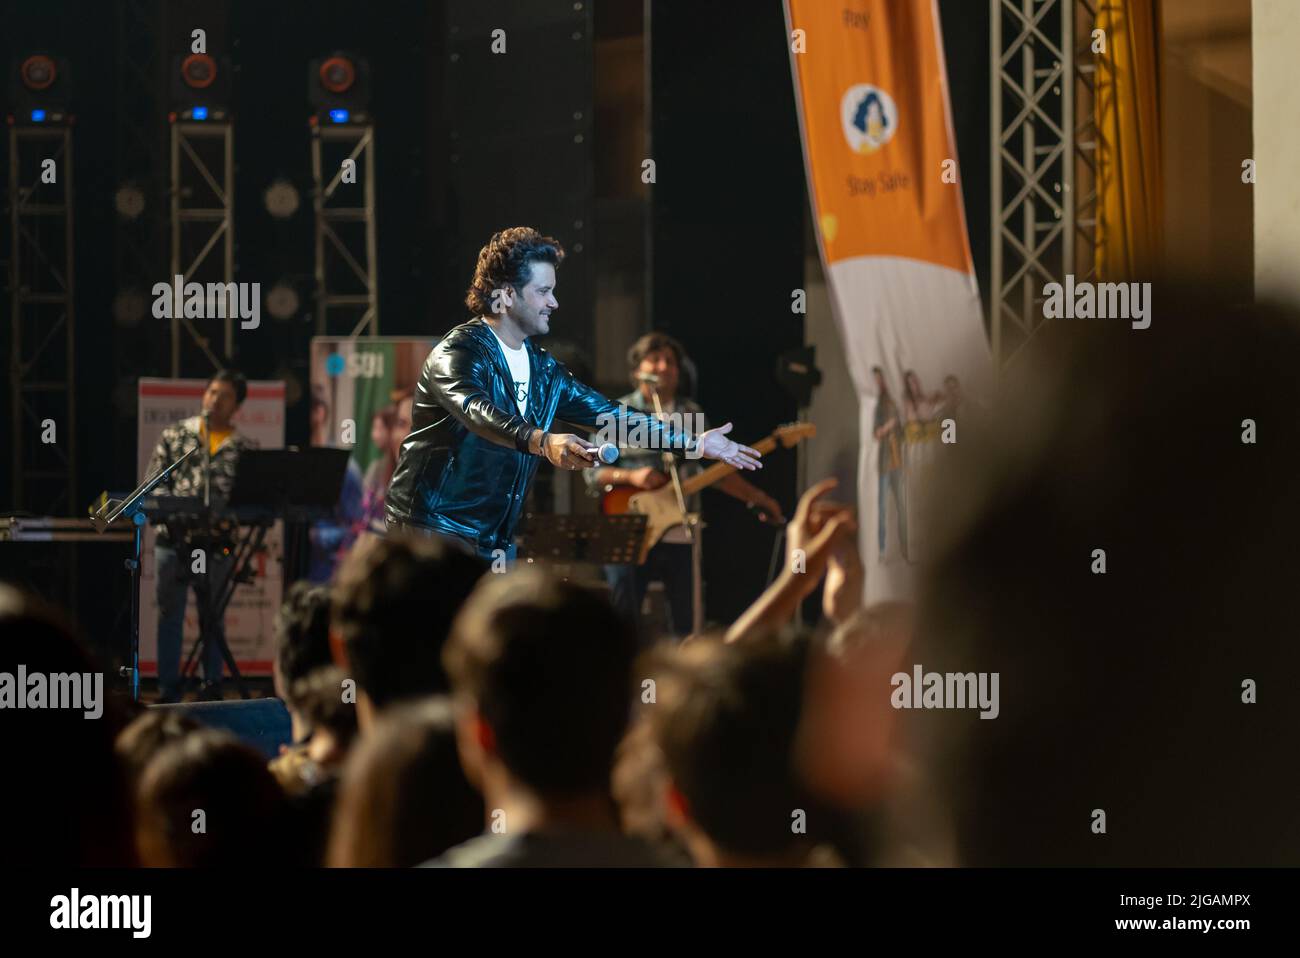 A view of a concert of Javed Ali at Jamshedpur, India Stock Photo